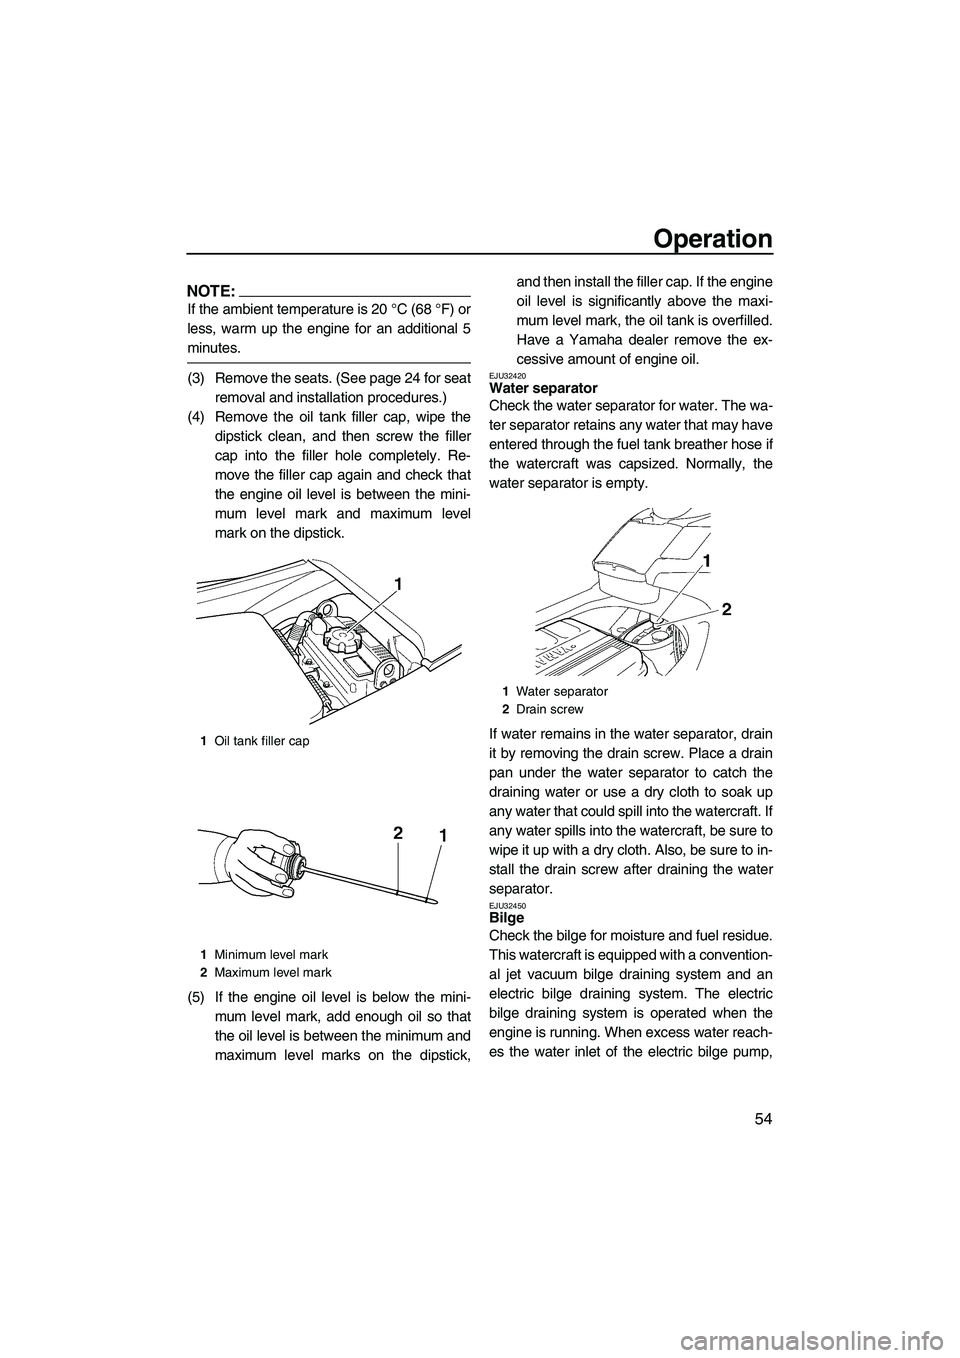 YAMAHA FX HO 2007  Owners Manual Operation
54
NOTE:
If the ambient temperature is 20 °C (68 °F) or
less, warm up the engine for an additional 5
minutes.
(3) Remove the seats. (See page 24 for seat
removal and installation procedure